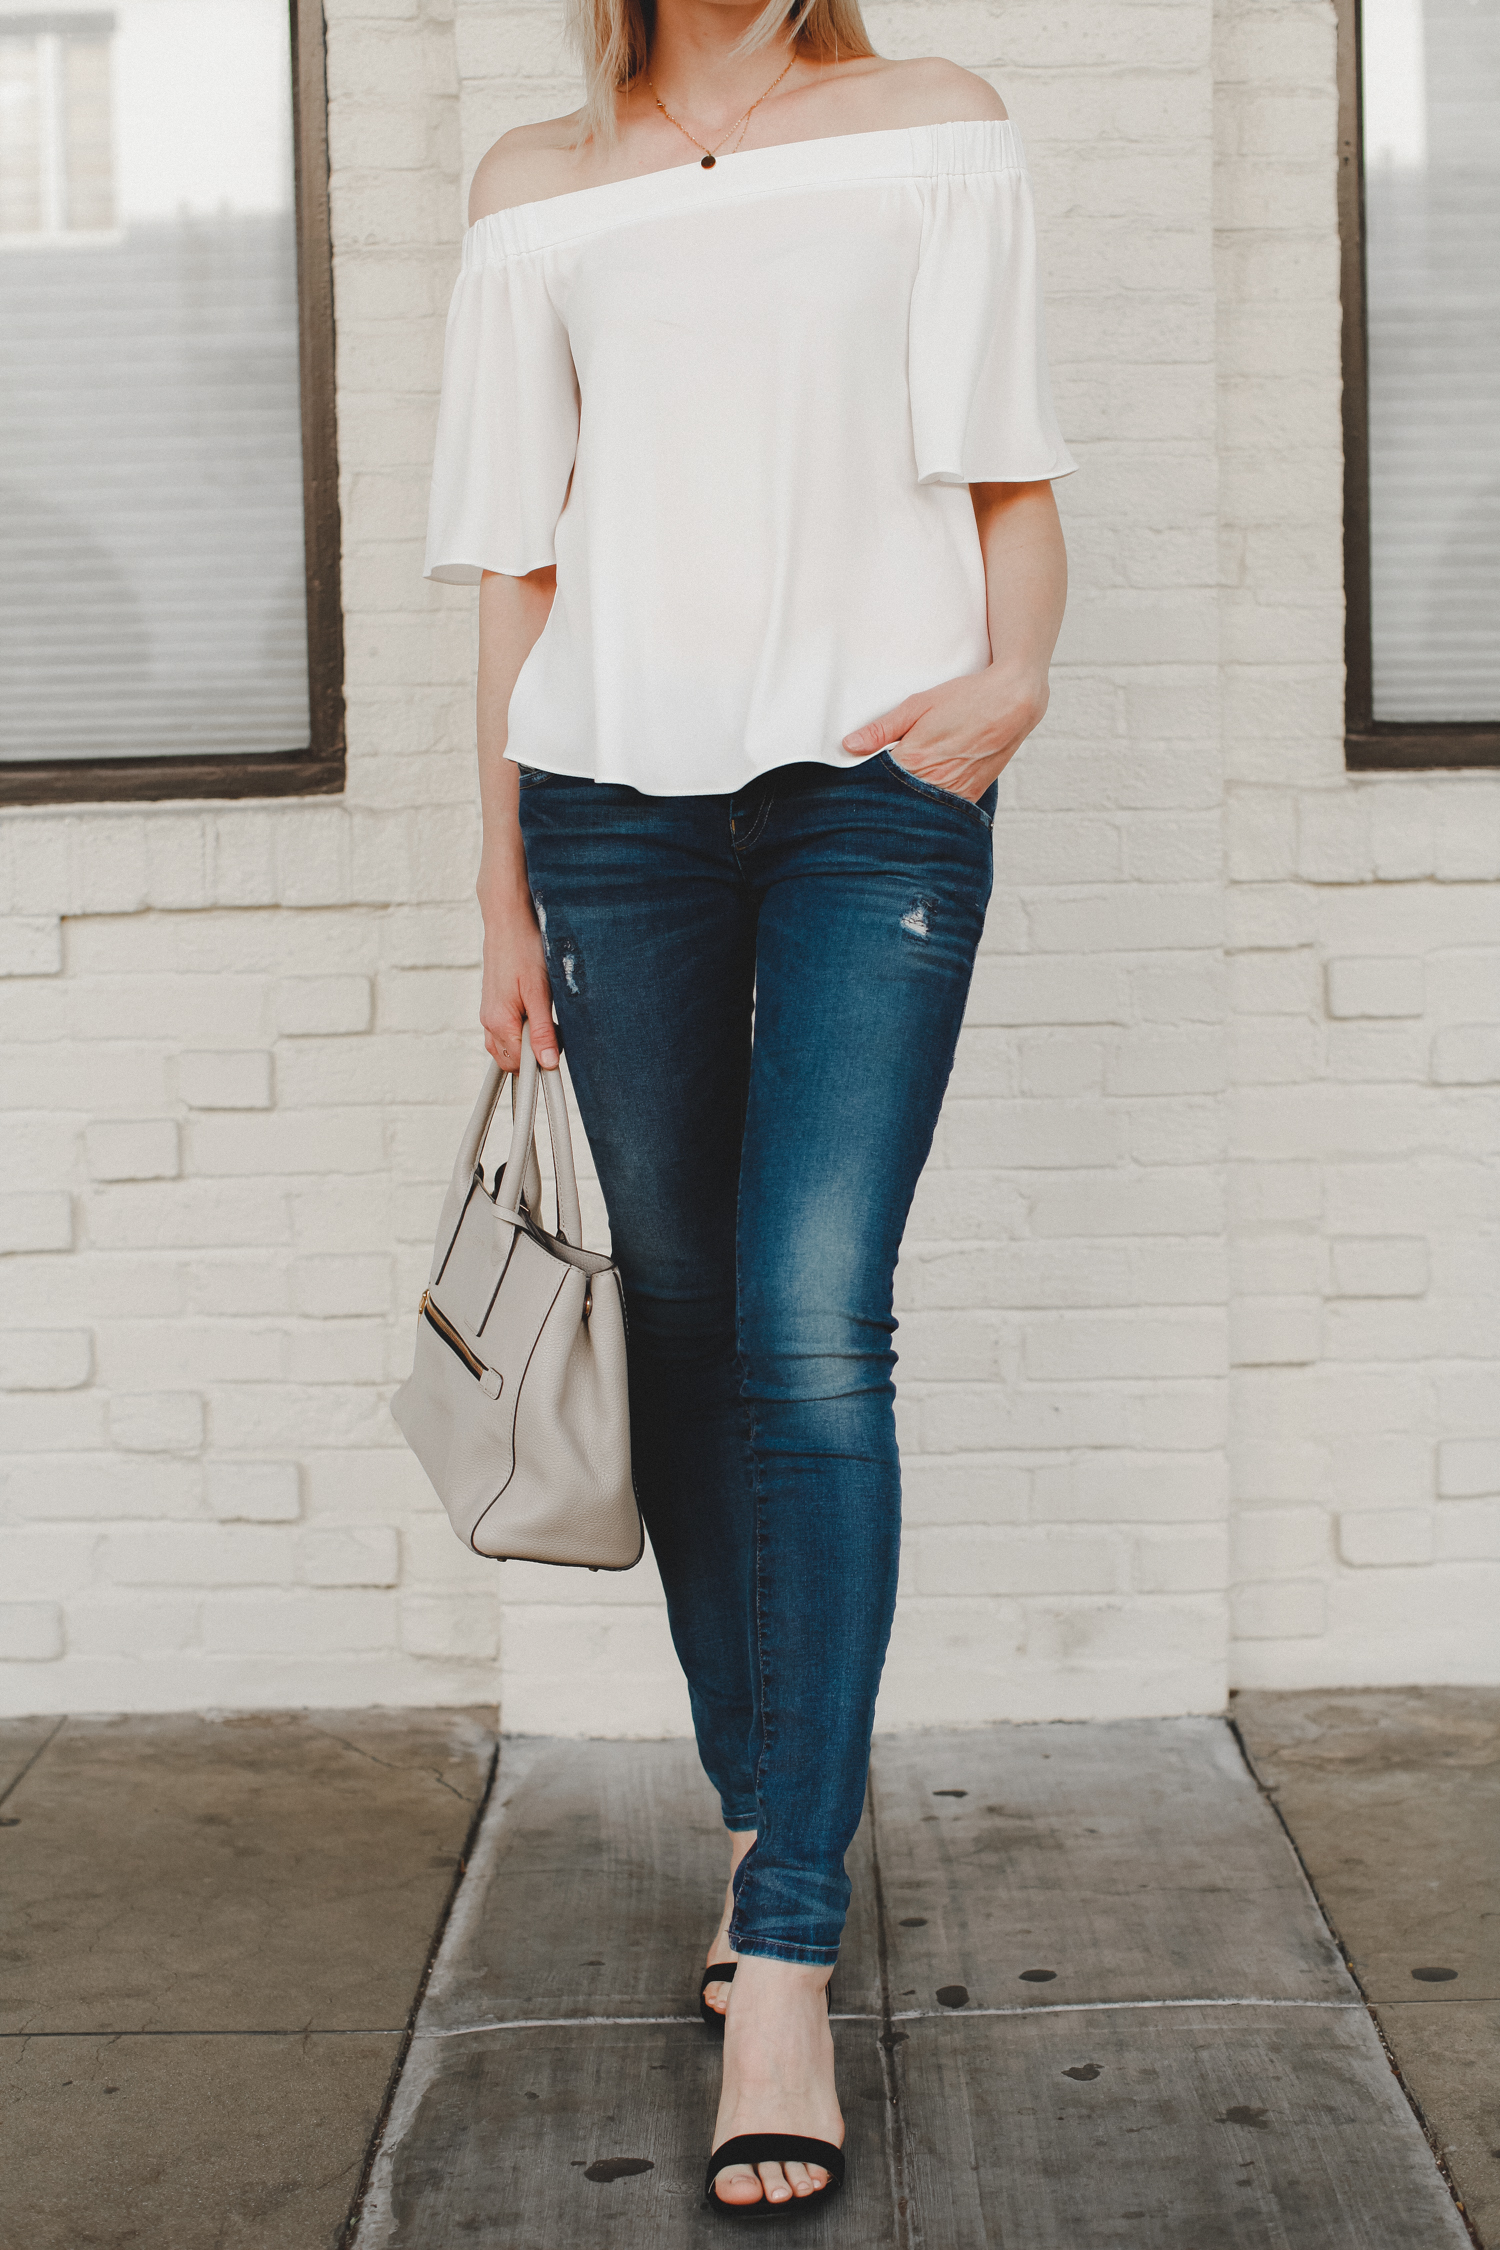 White off the shoulder top and denim